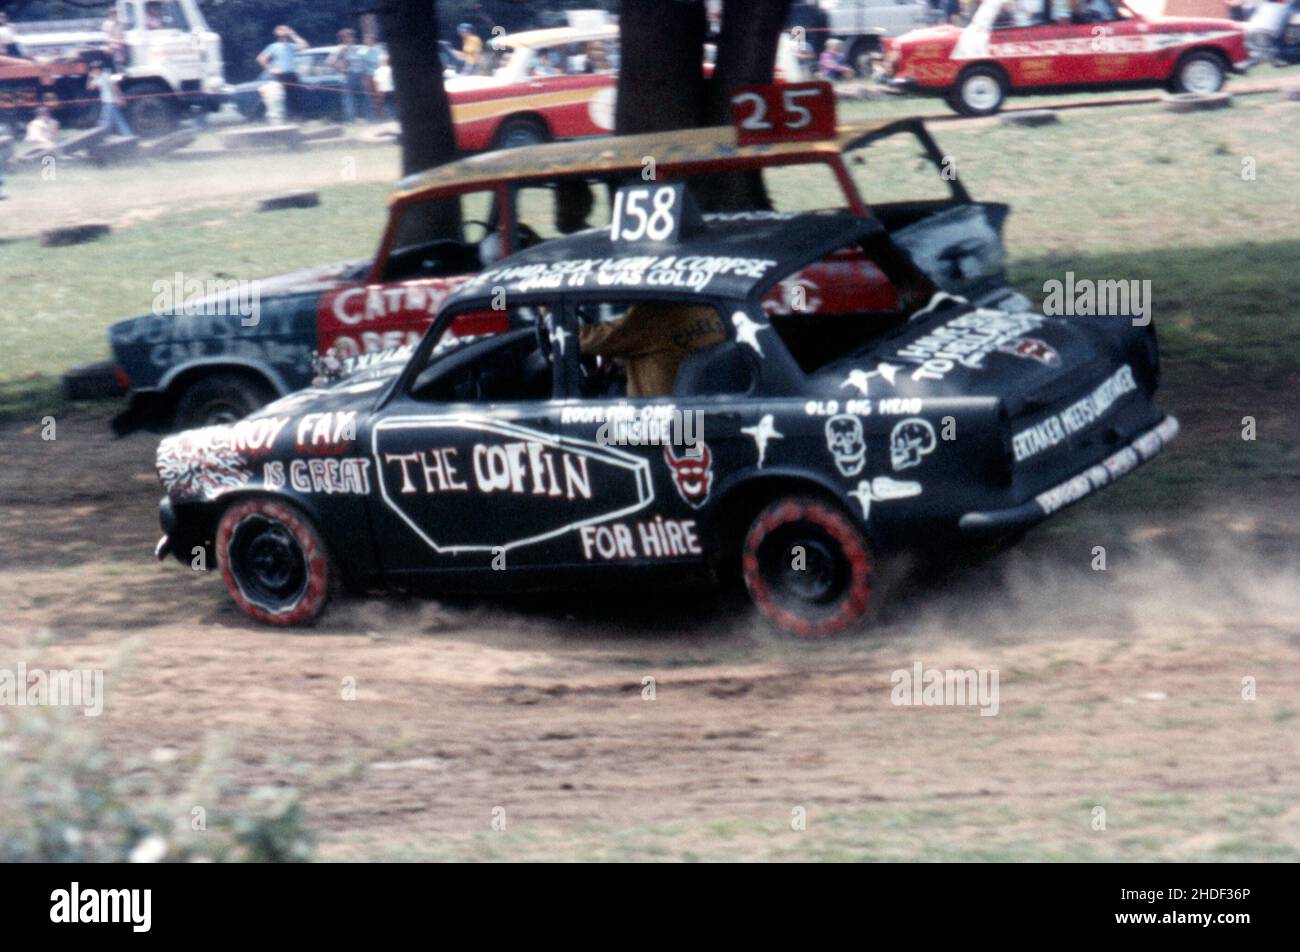 Banger racing featuring colourful painted cars with names like the Coffin. 1970s, motor sport Stock Photo